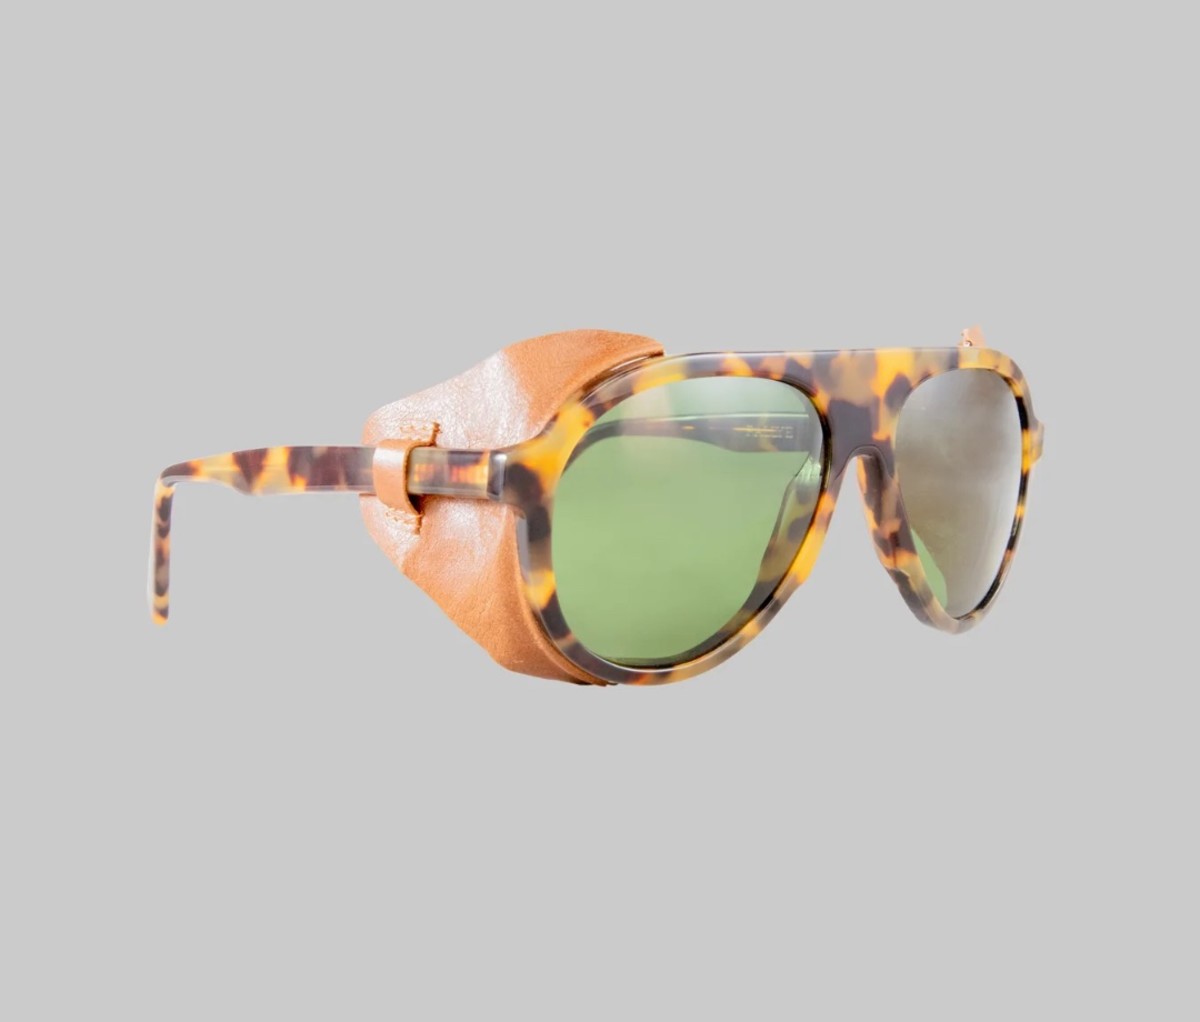 Tortoise shell framed sunglasses with green lenses and leather side hoods on a gray background.